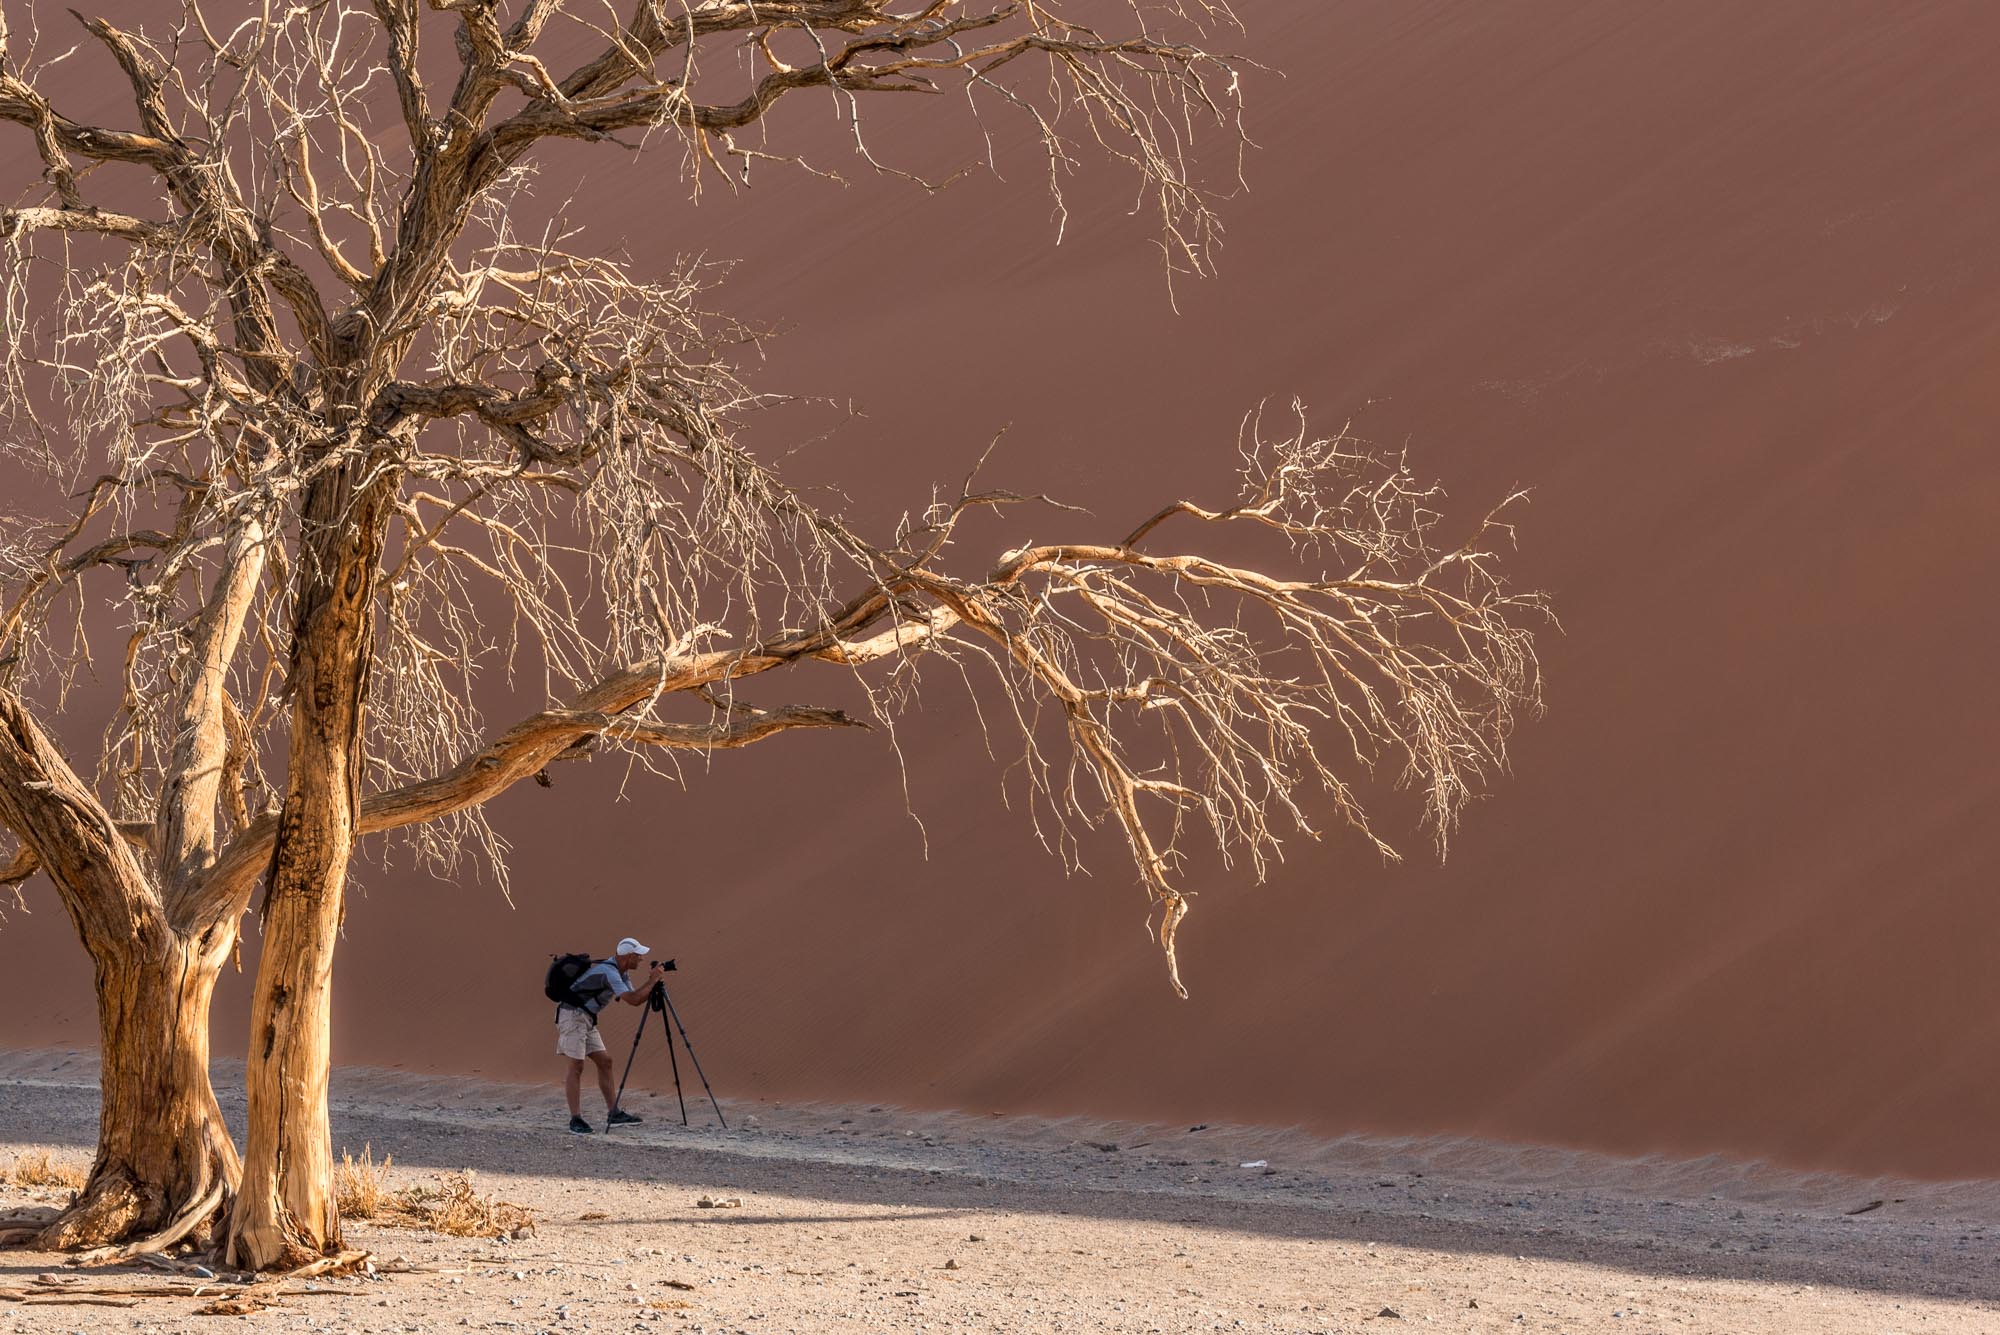 photographing dune 45 in the namib